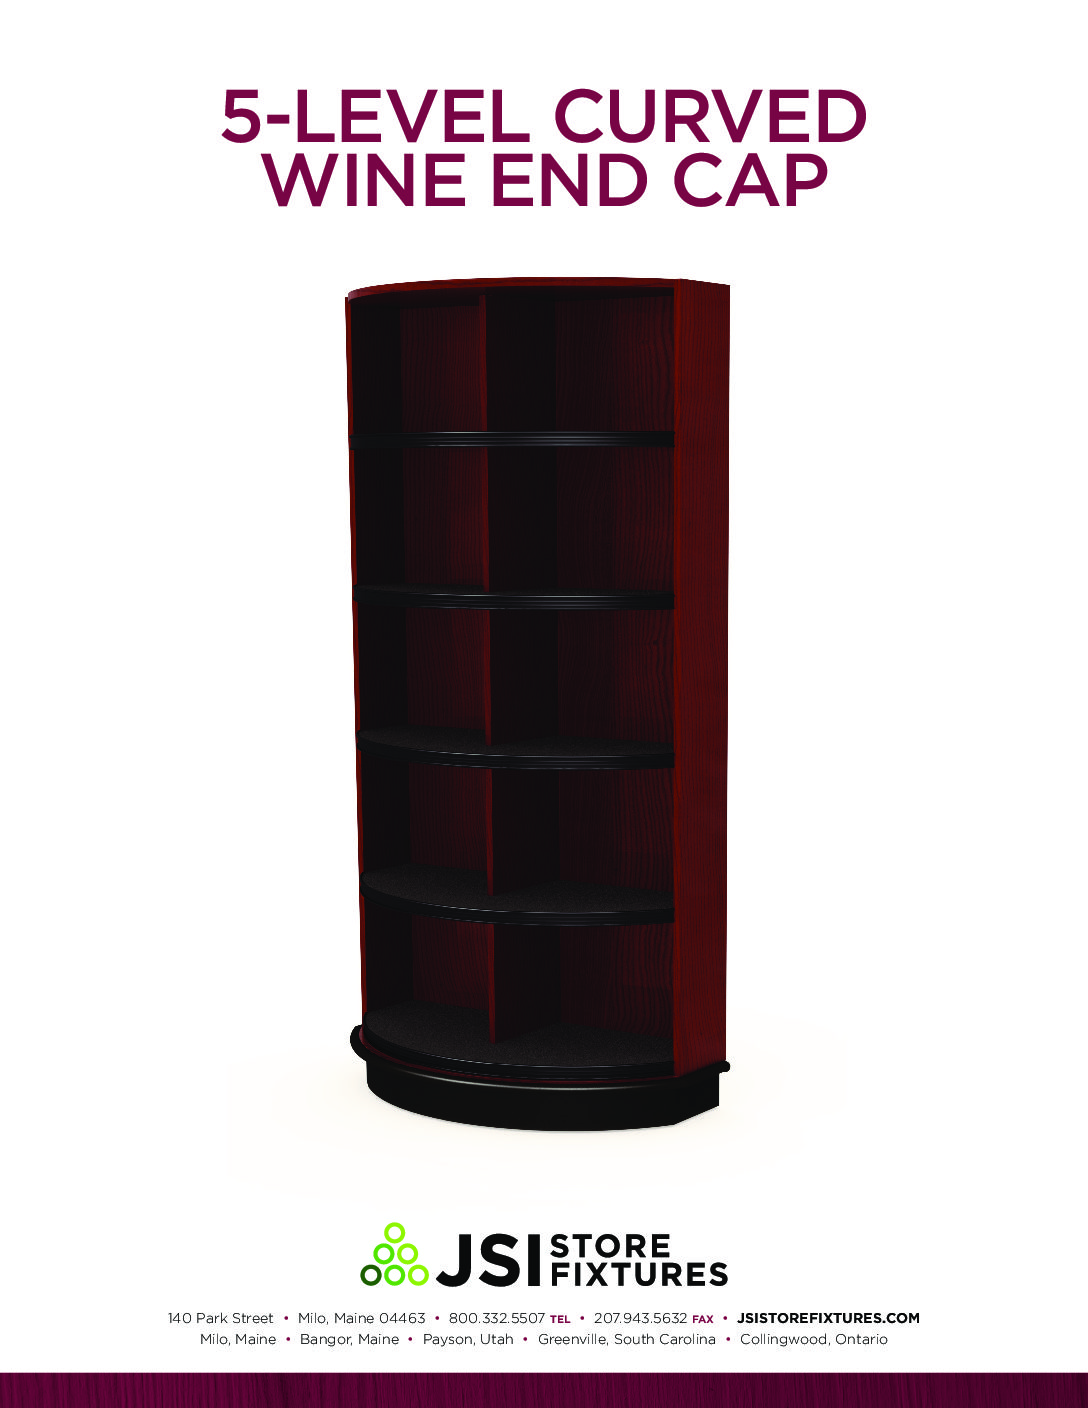 5-Level Curved Wine End Cap